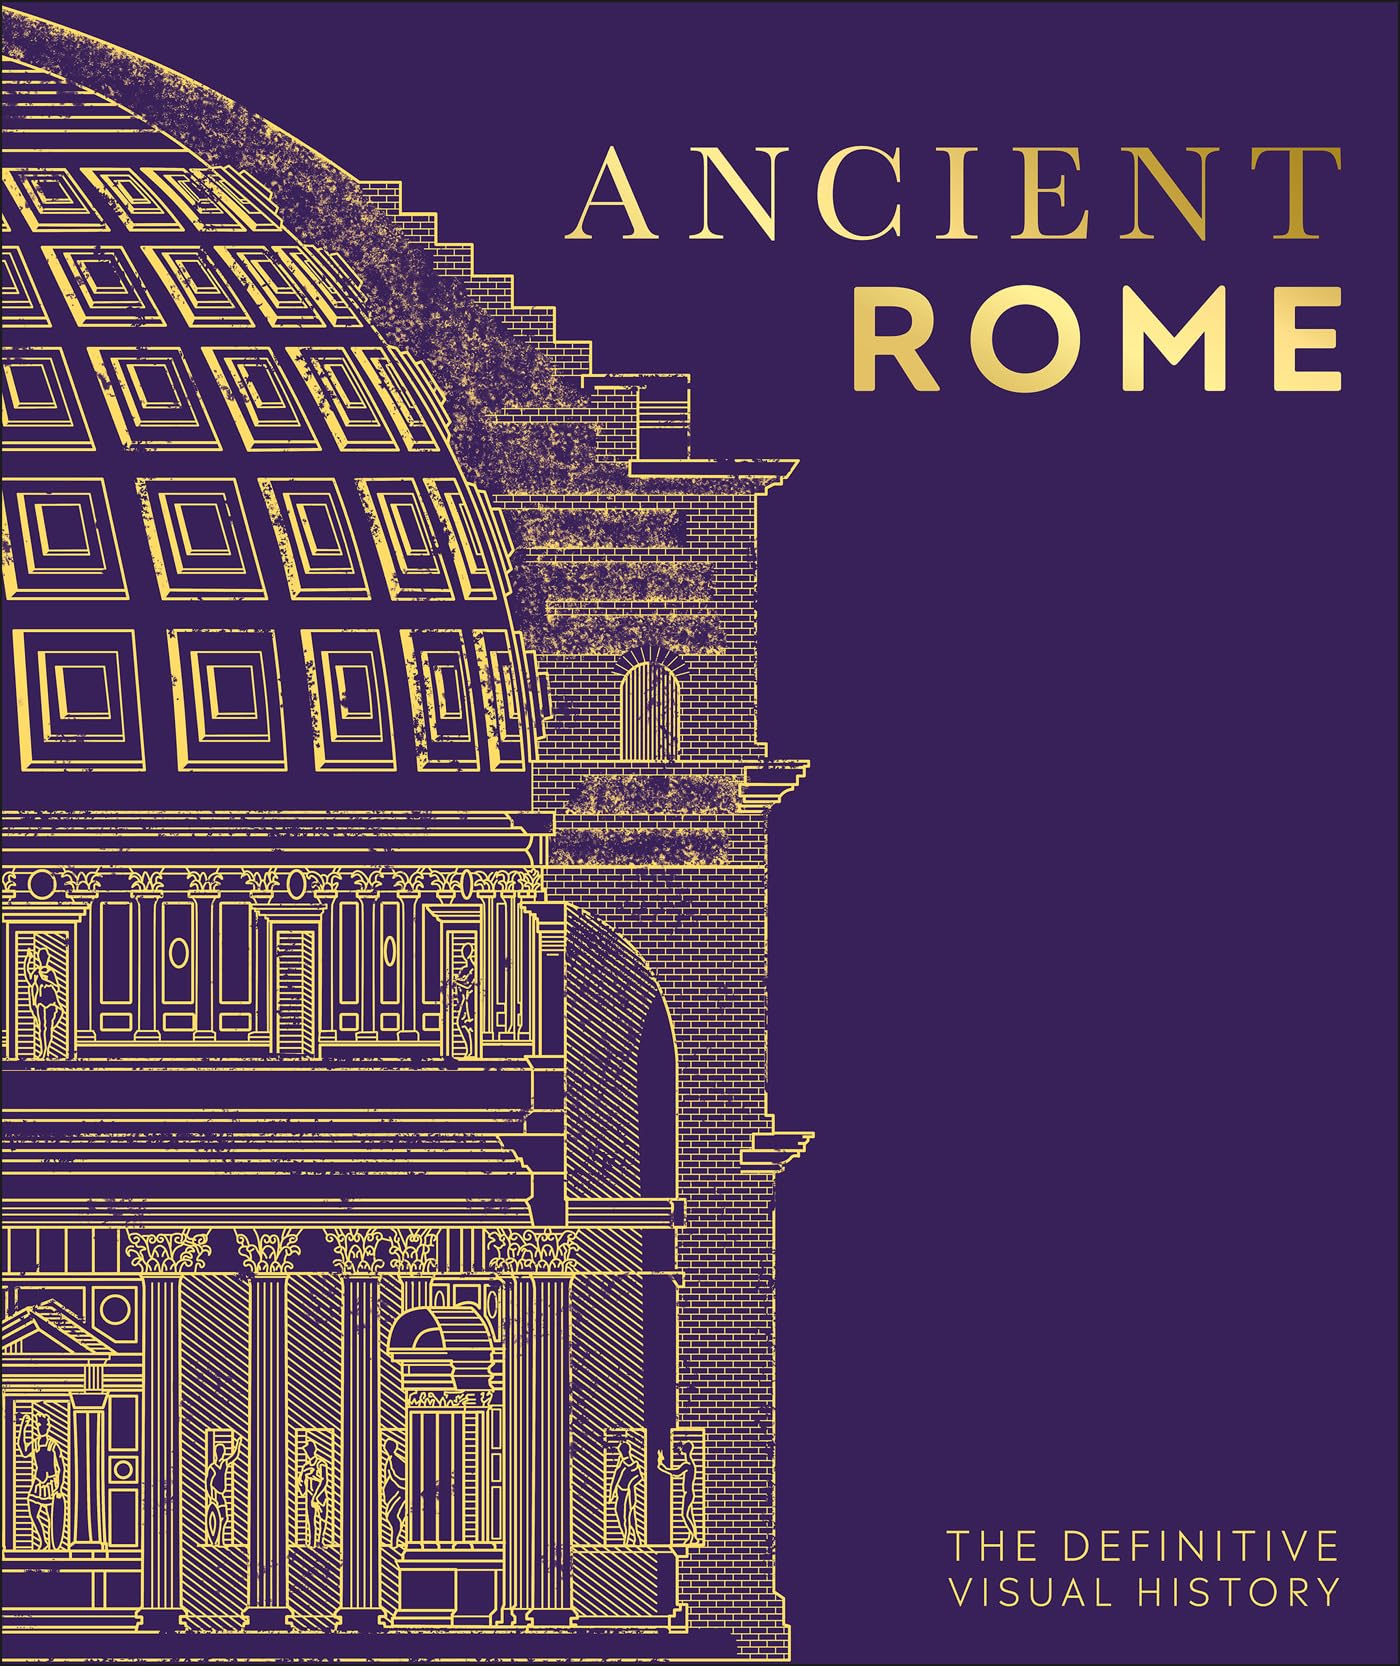 Ancient Rome: The Definitive Visual History (DK Classic History) (Kindle eBook) by DK $1.99